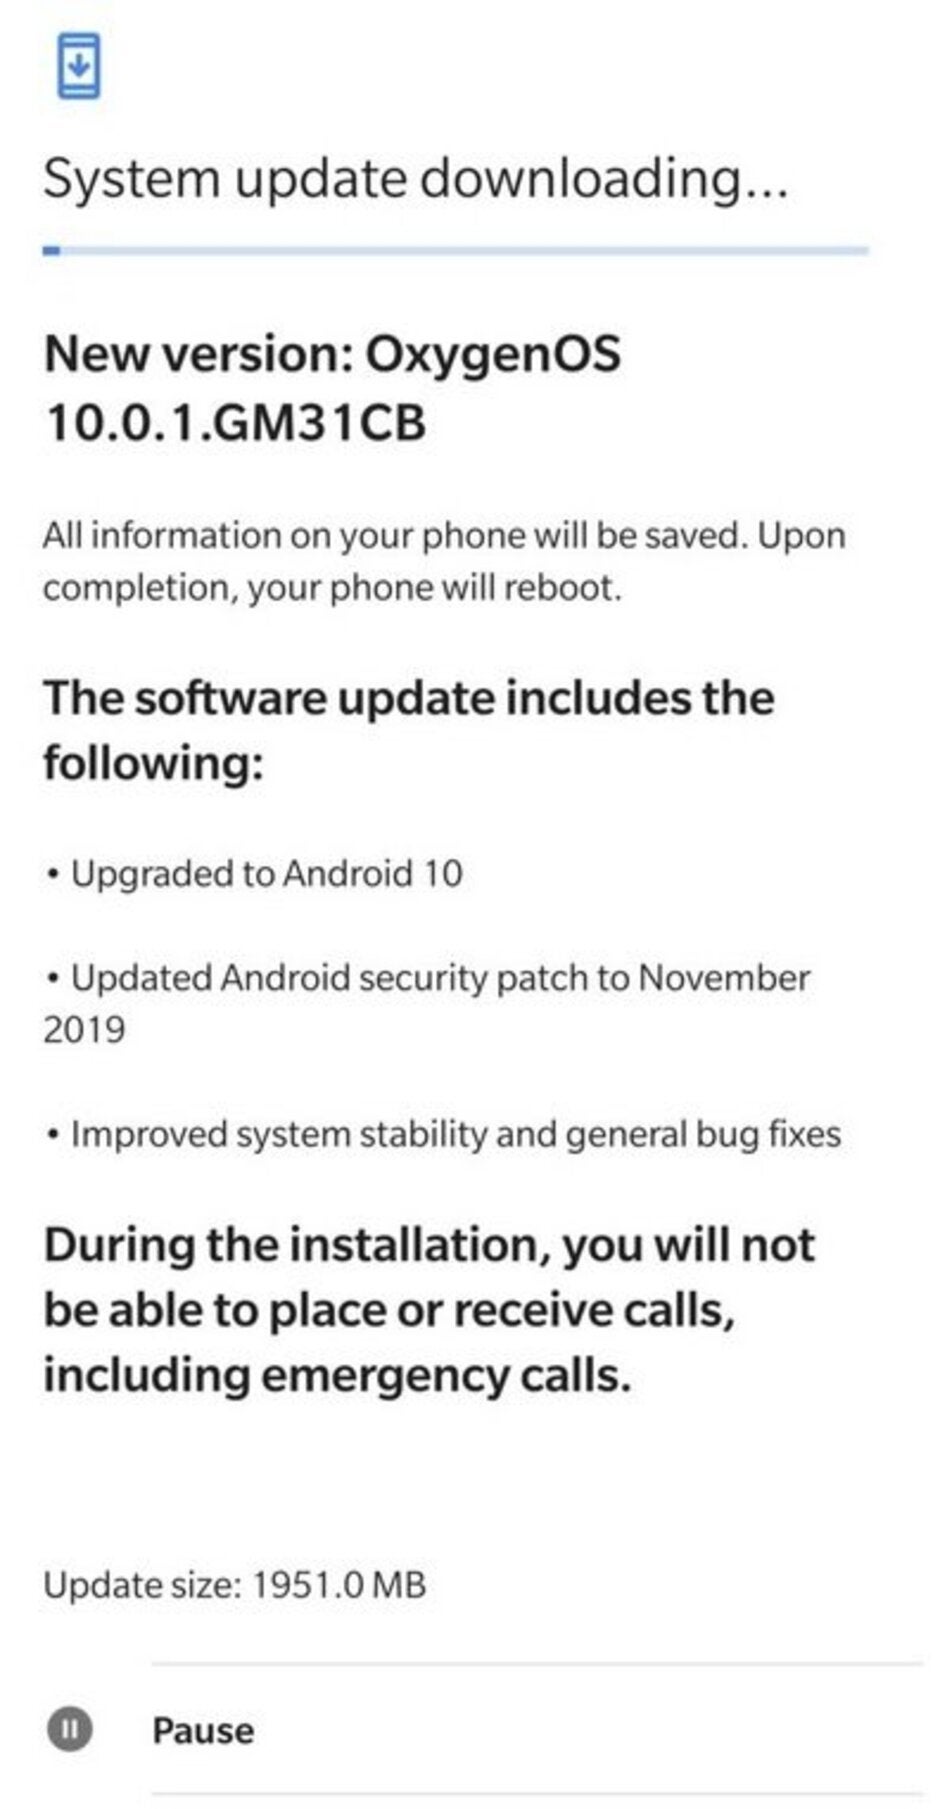 Android 10 is finally available to those with the T-Mobile version of the OnePlus 7 Pro - This is one reason why the unlocked version of an Android phone tops the carrier-locked model